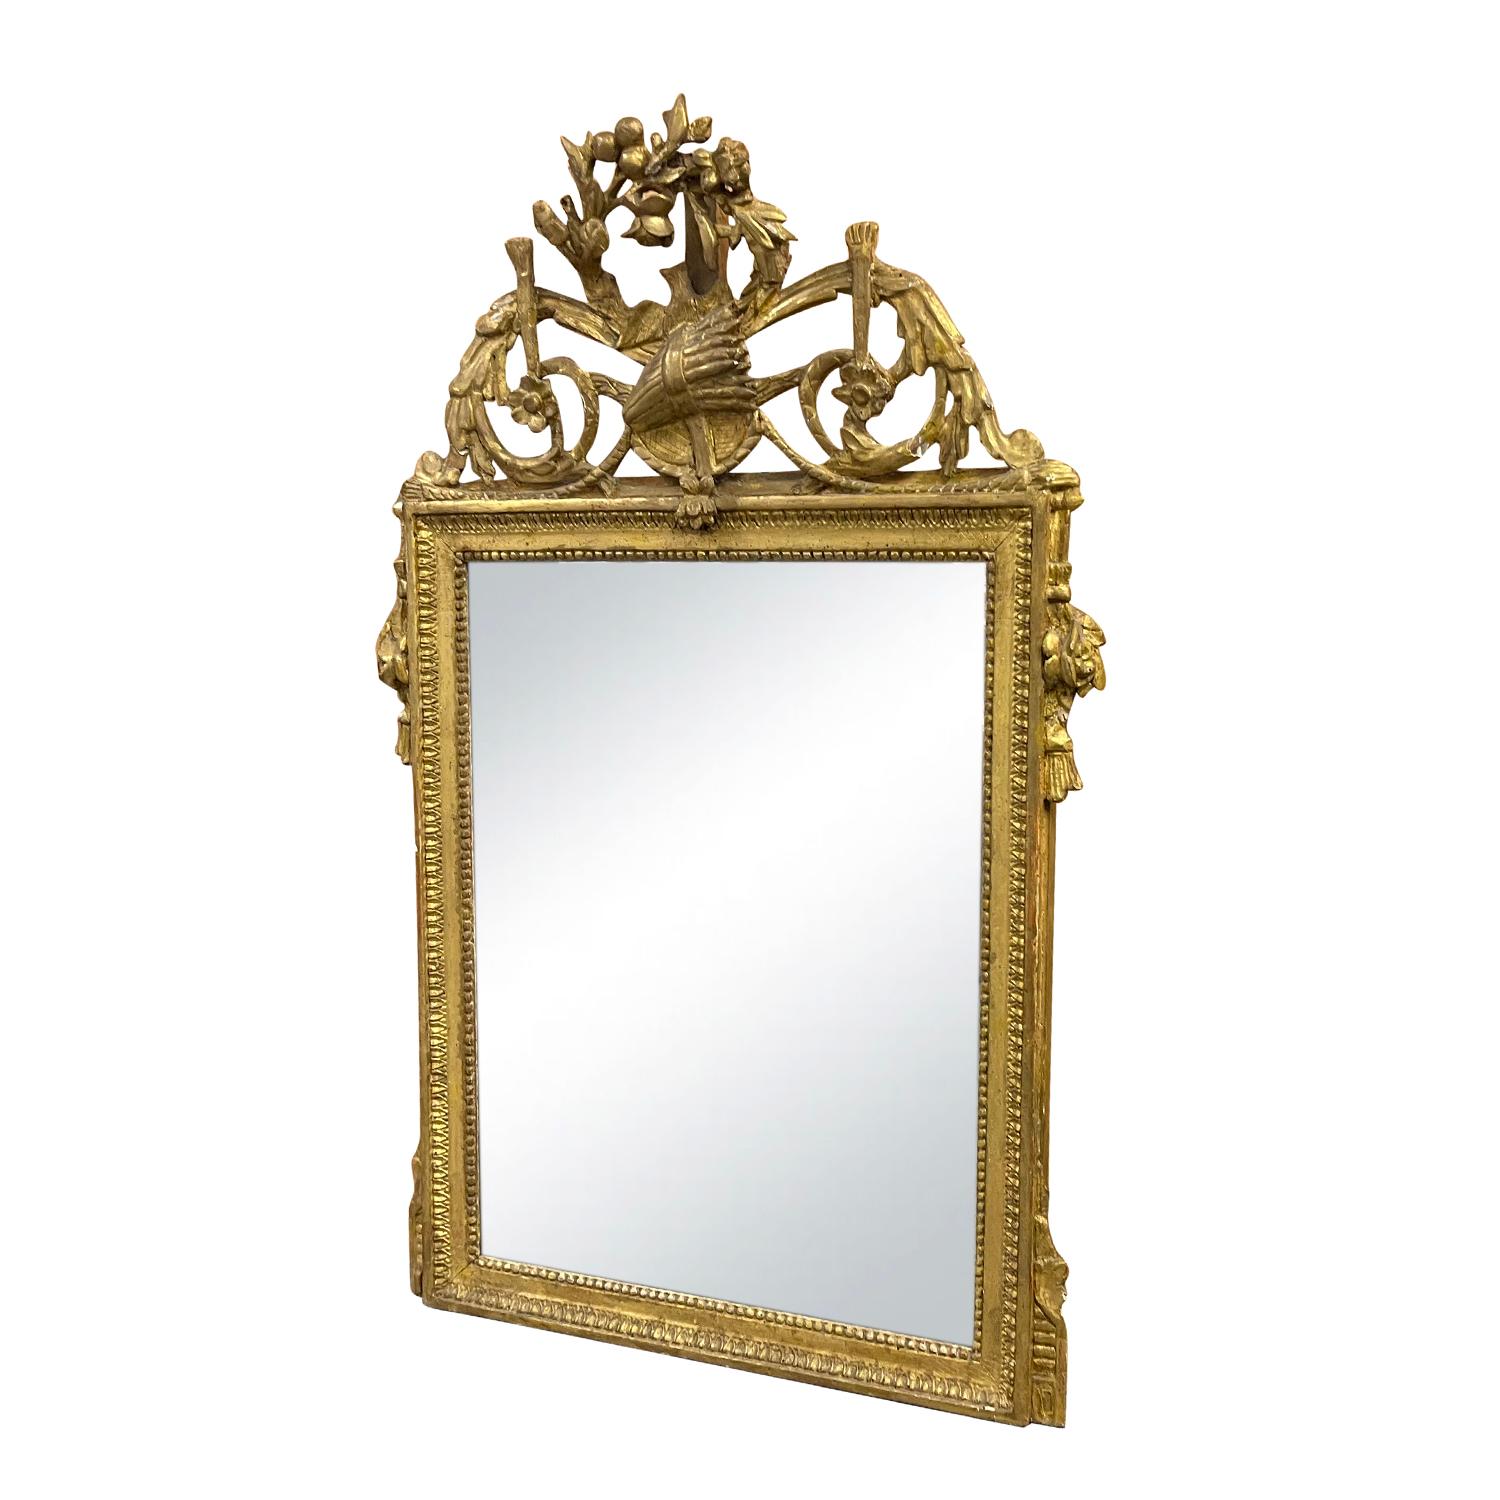 Hand-Carved 18th Century Gold French Louis XVI Gilded Wall Glass Mirror, Antique Wall Décor For Sale